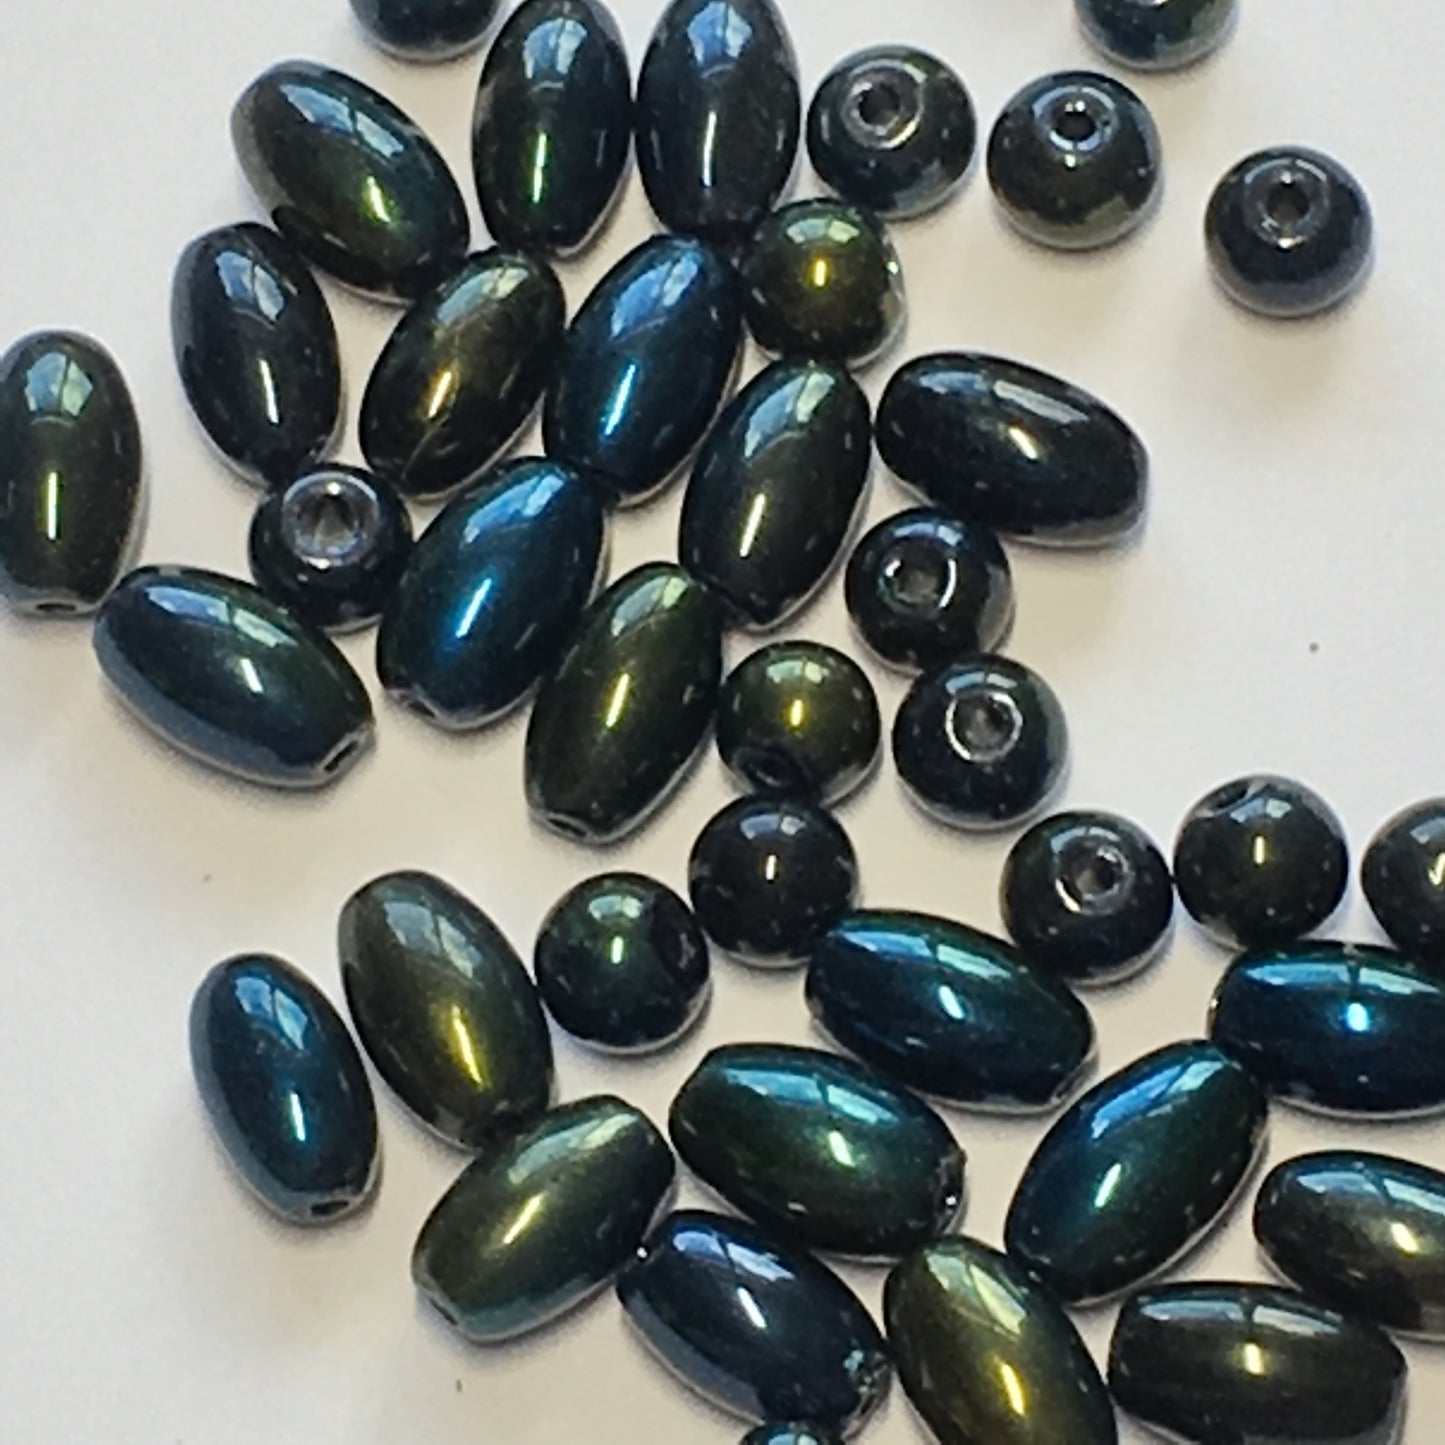 Metallic Blue Green Oval and Round Beads, 7 x 4 mm and 4 mm, 51 Beads